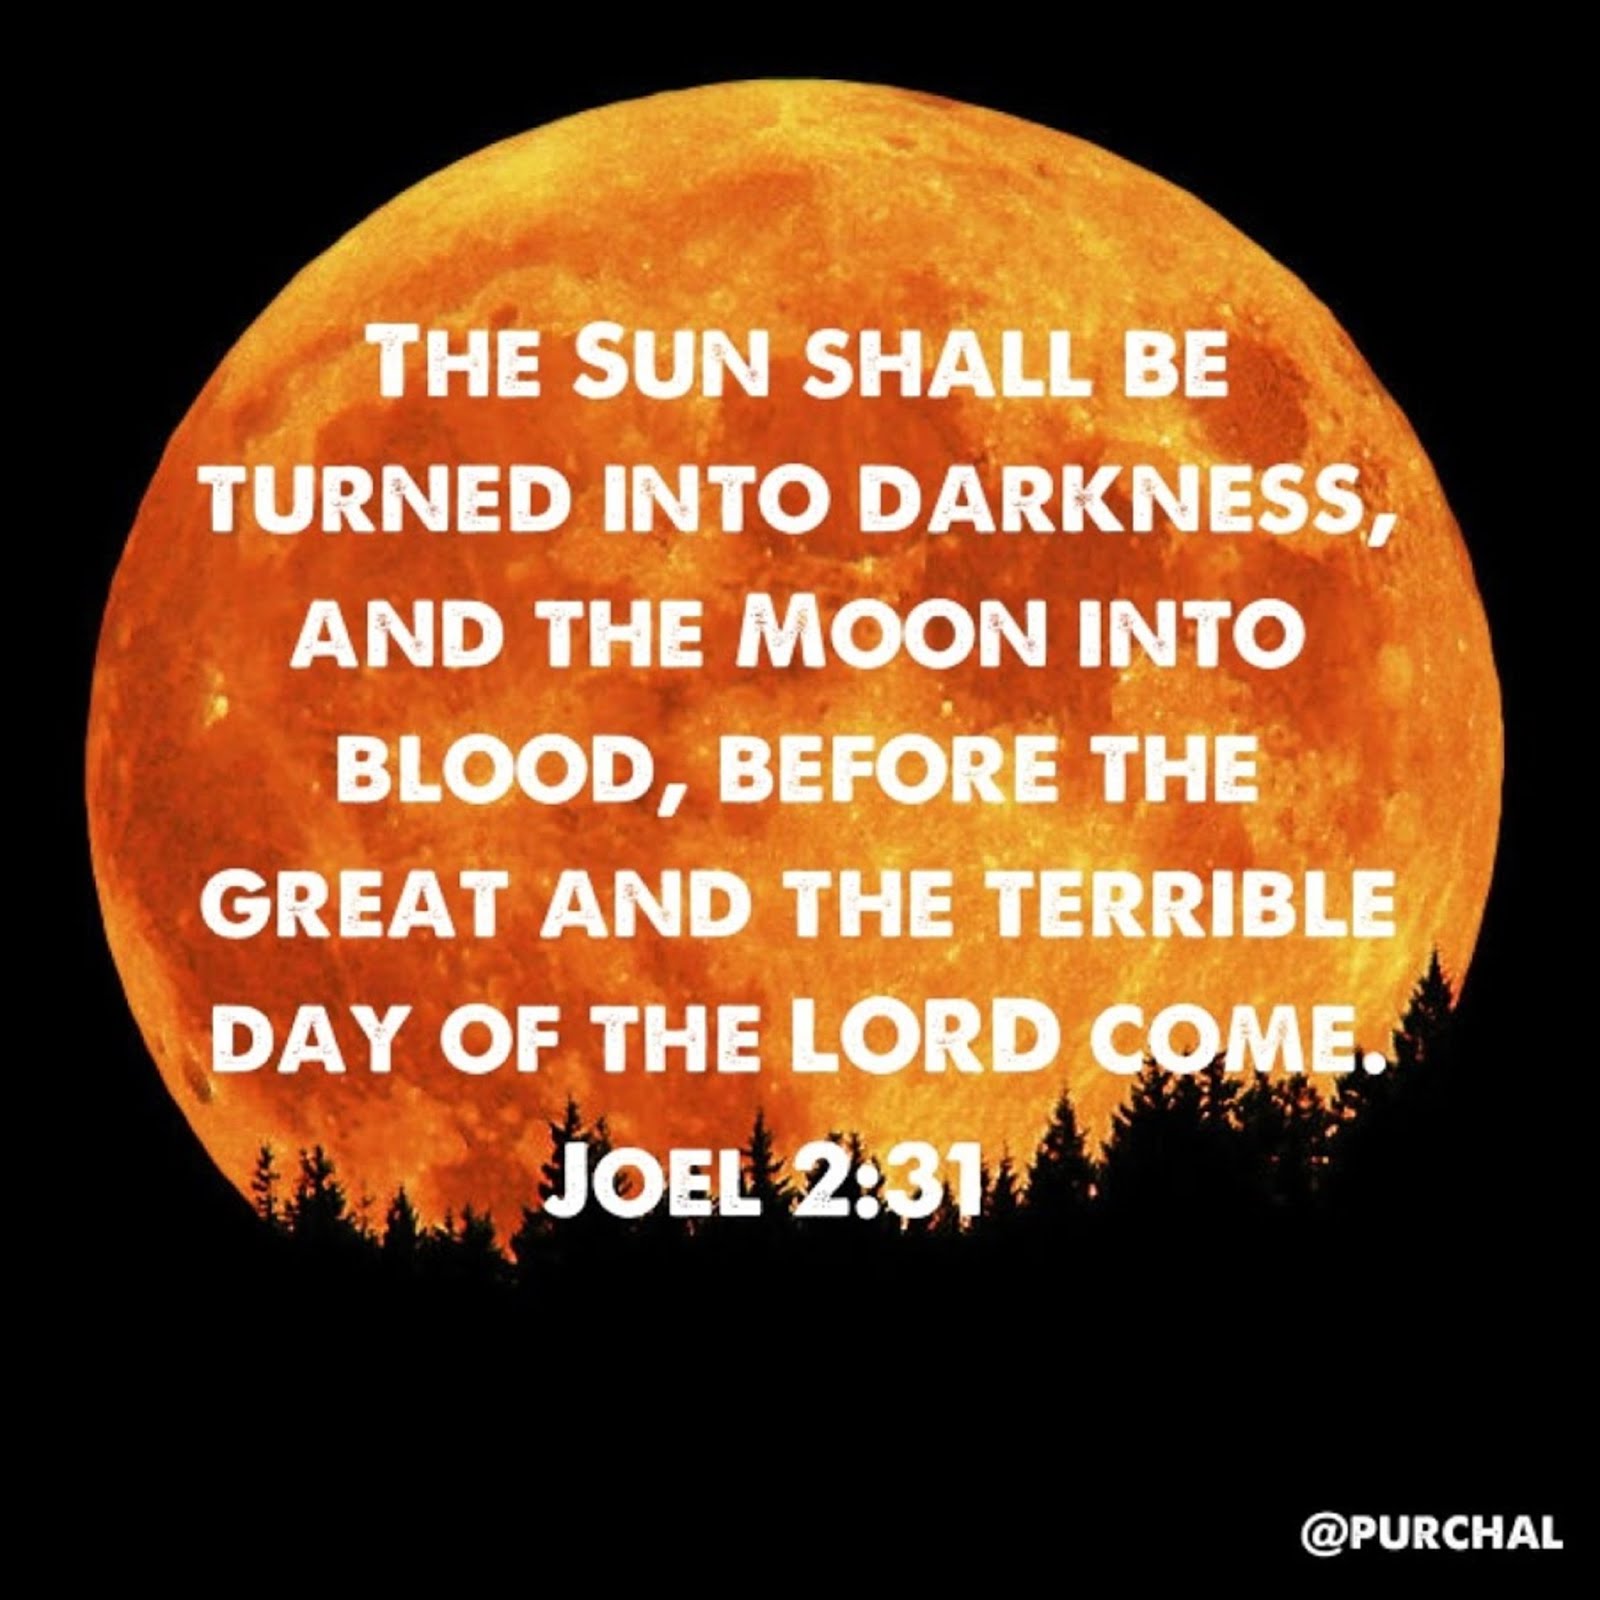 THE SUN SHALL BE TURNED INTO DARKNESS AND THE MOON INTO BLOOD BEFORE THE GREAT AND TERRIBLE DAY OF